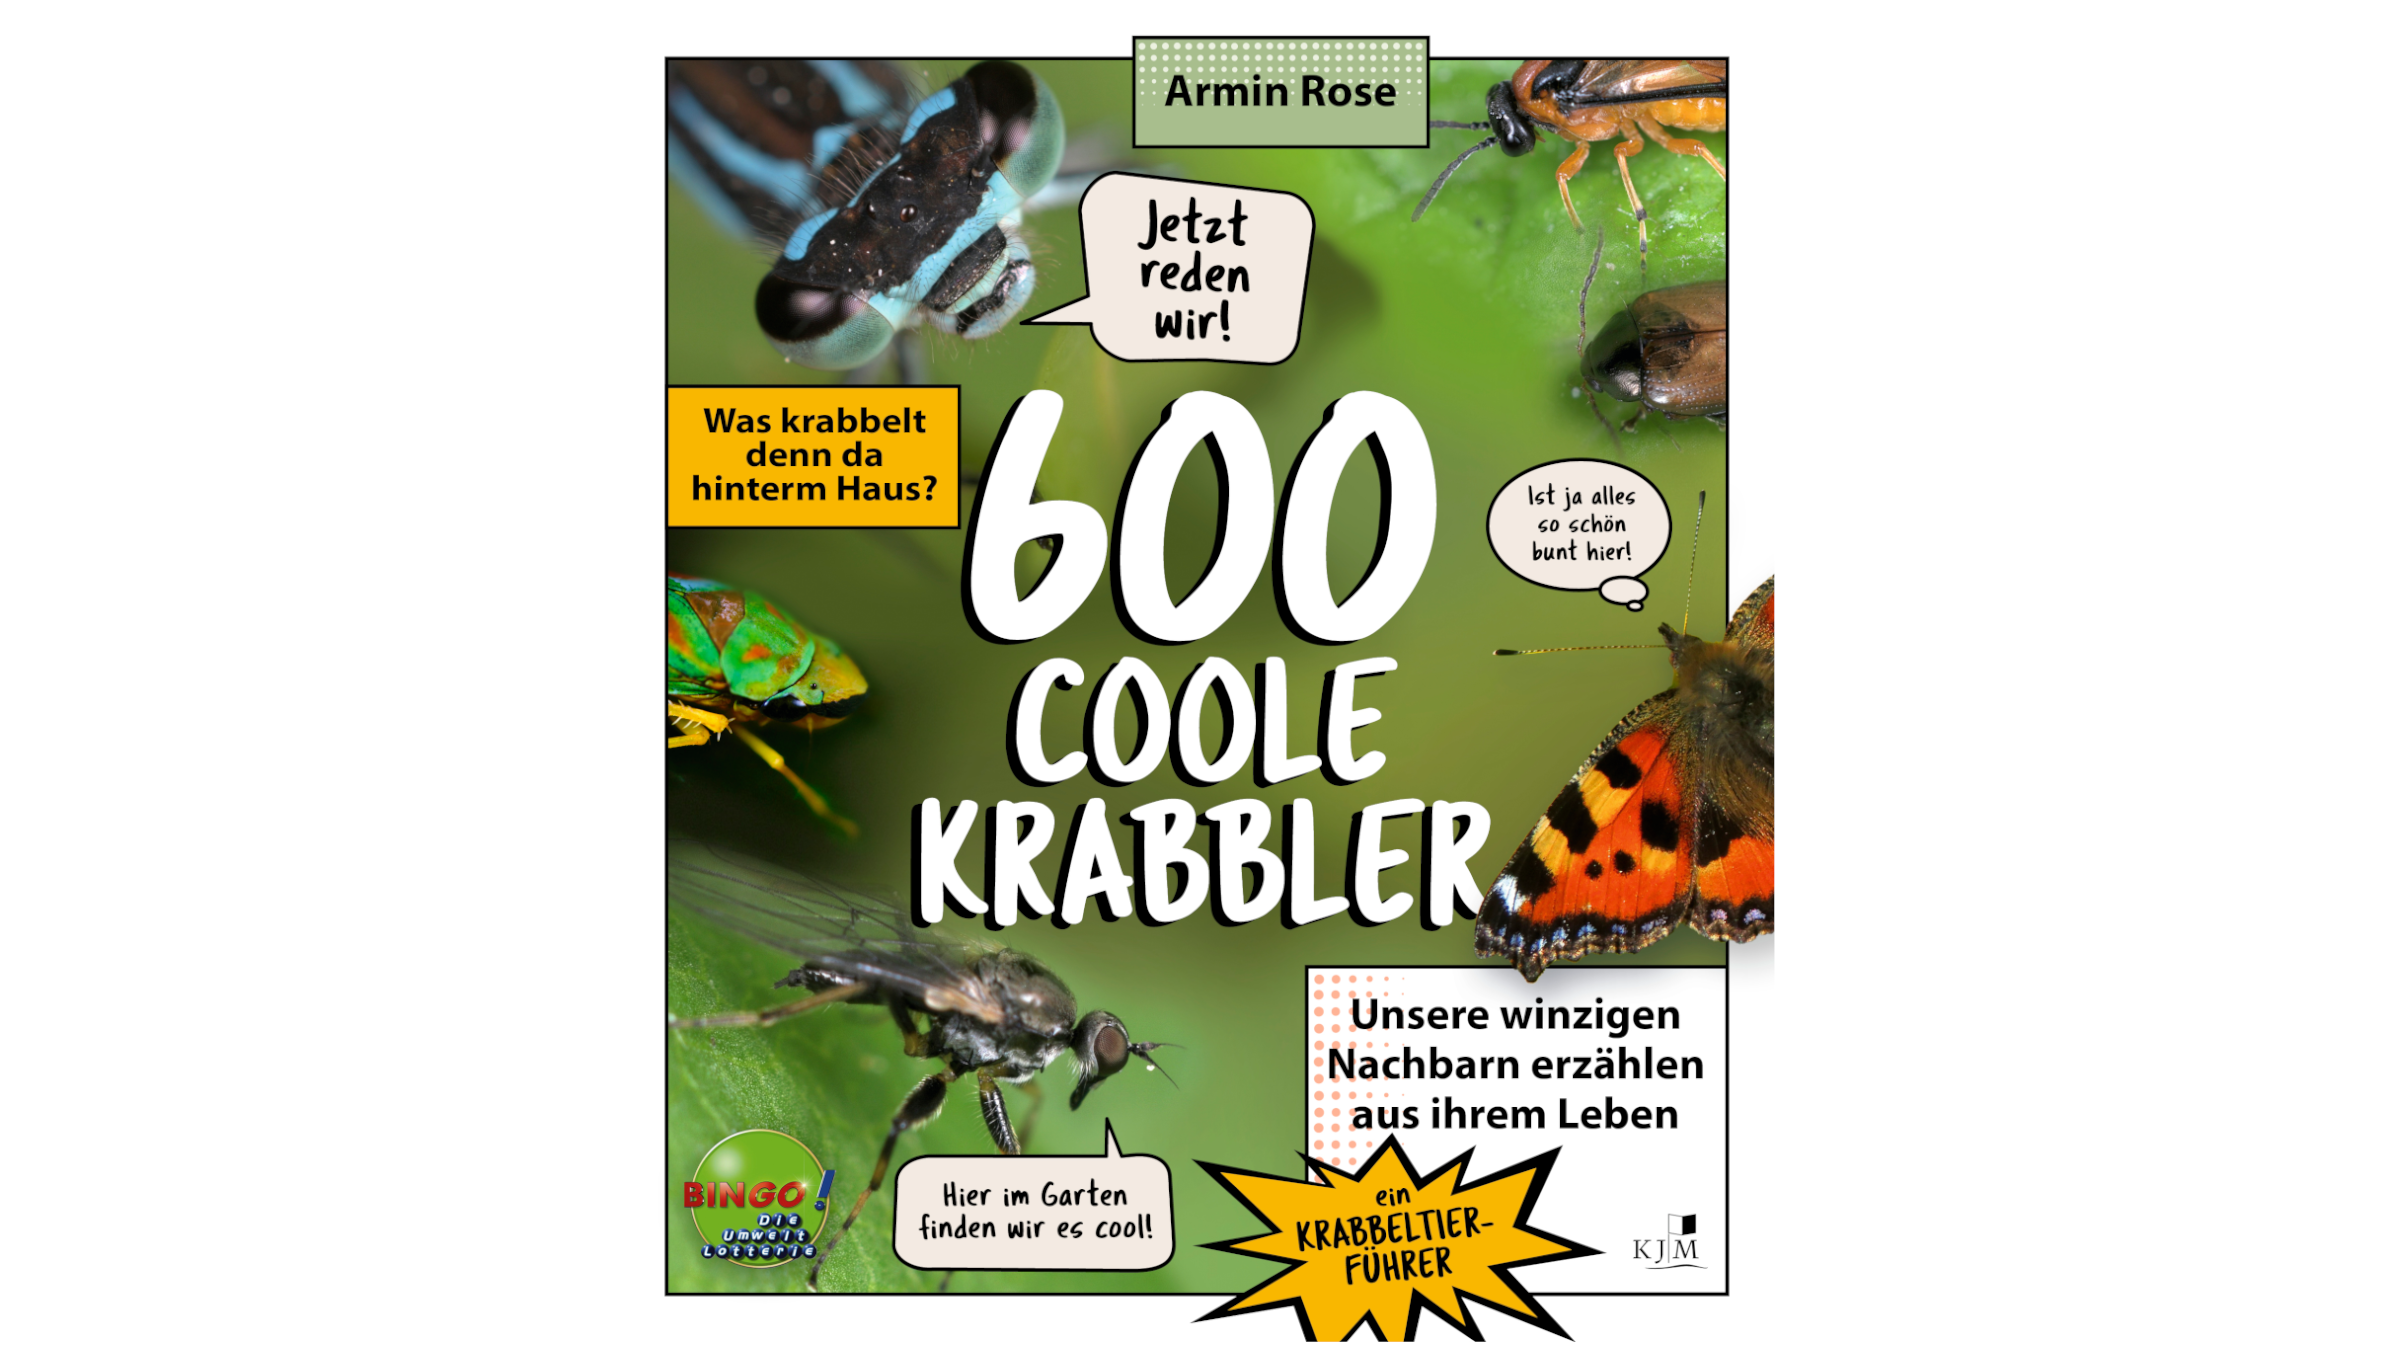 Book cover front of the book "600 cool crawlers" showing several insects.